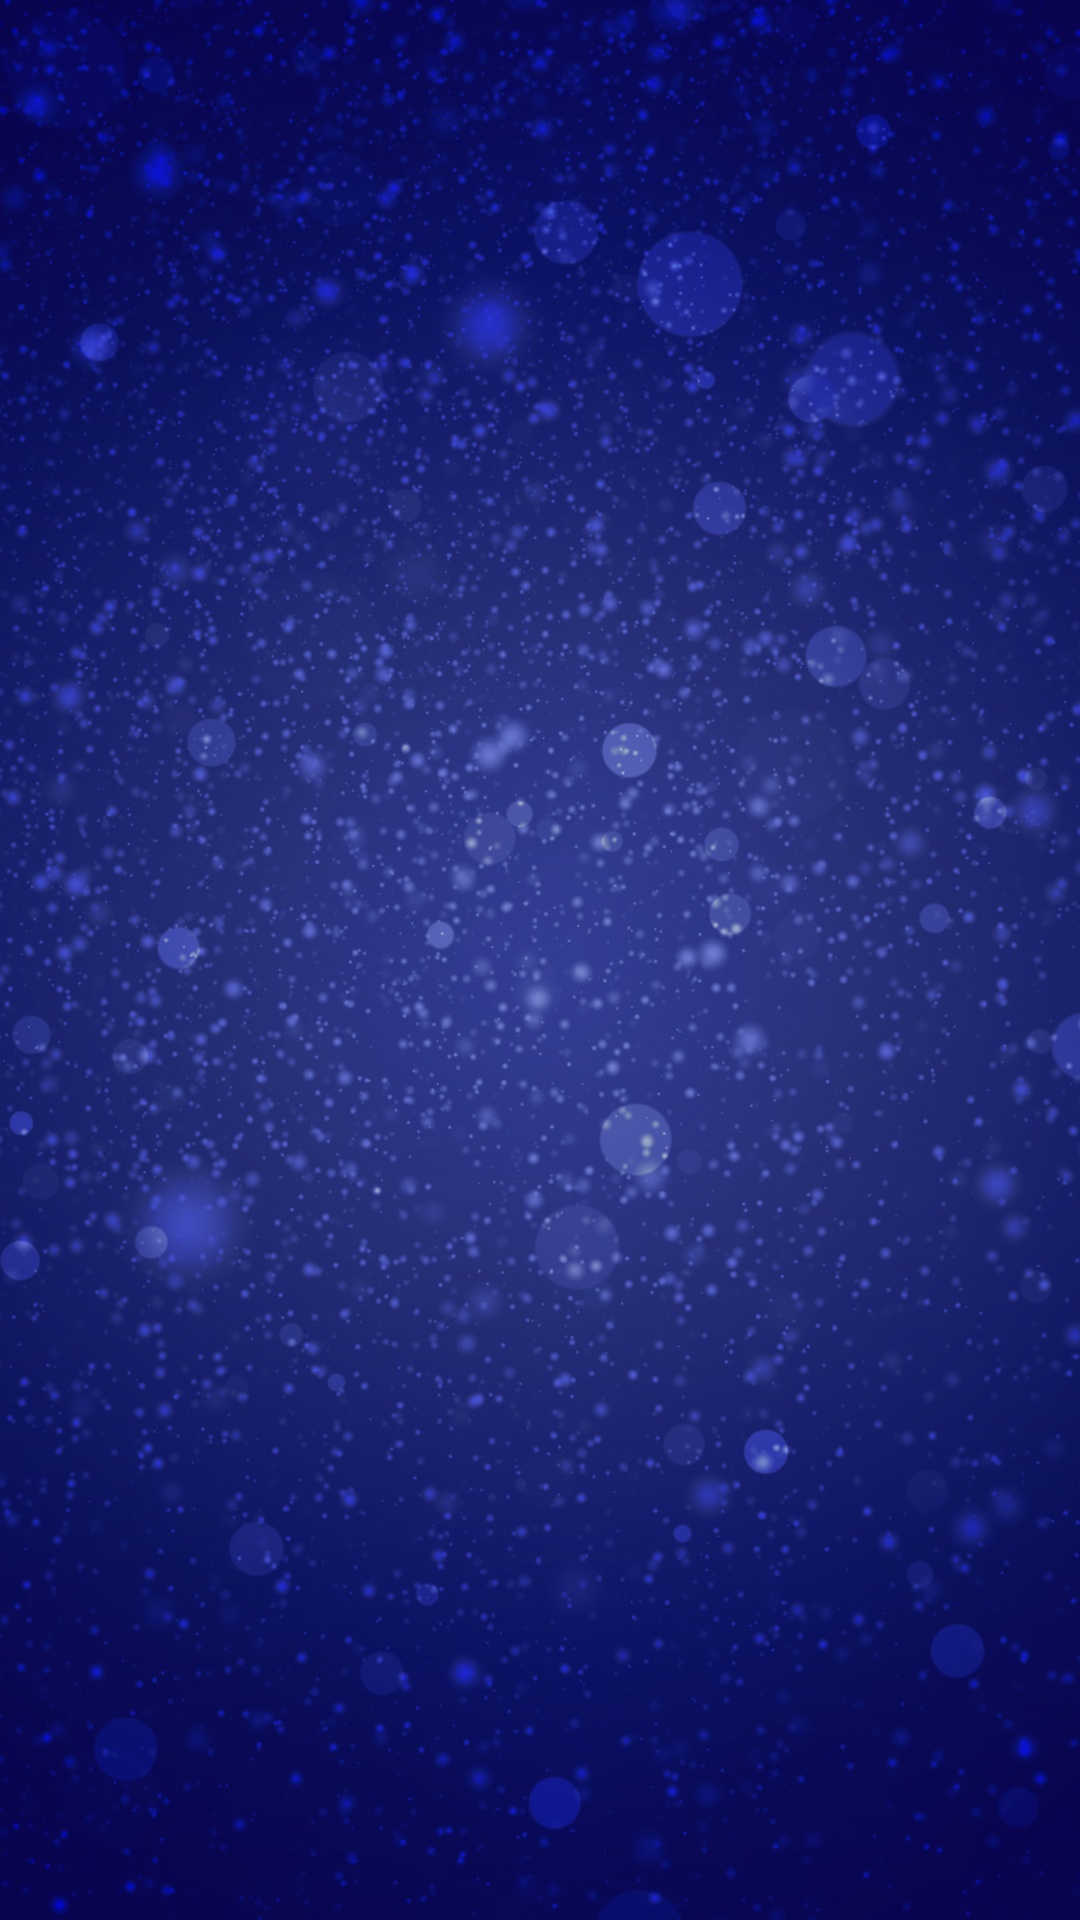 Blue and White Galaxy Illustration. Wallpaper in 1080x1920 Resolution